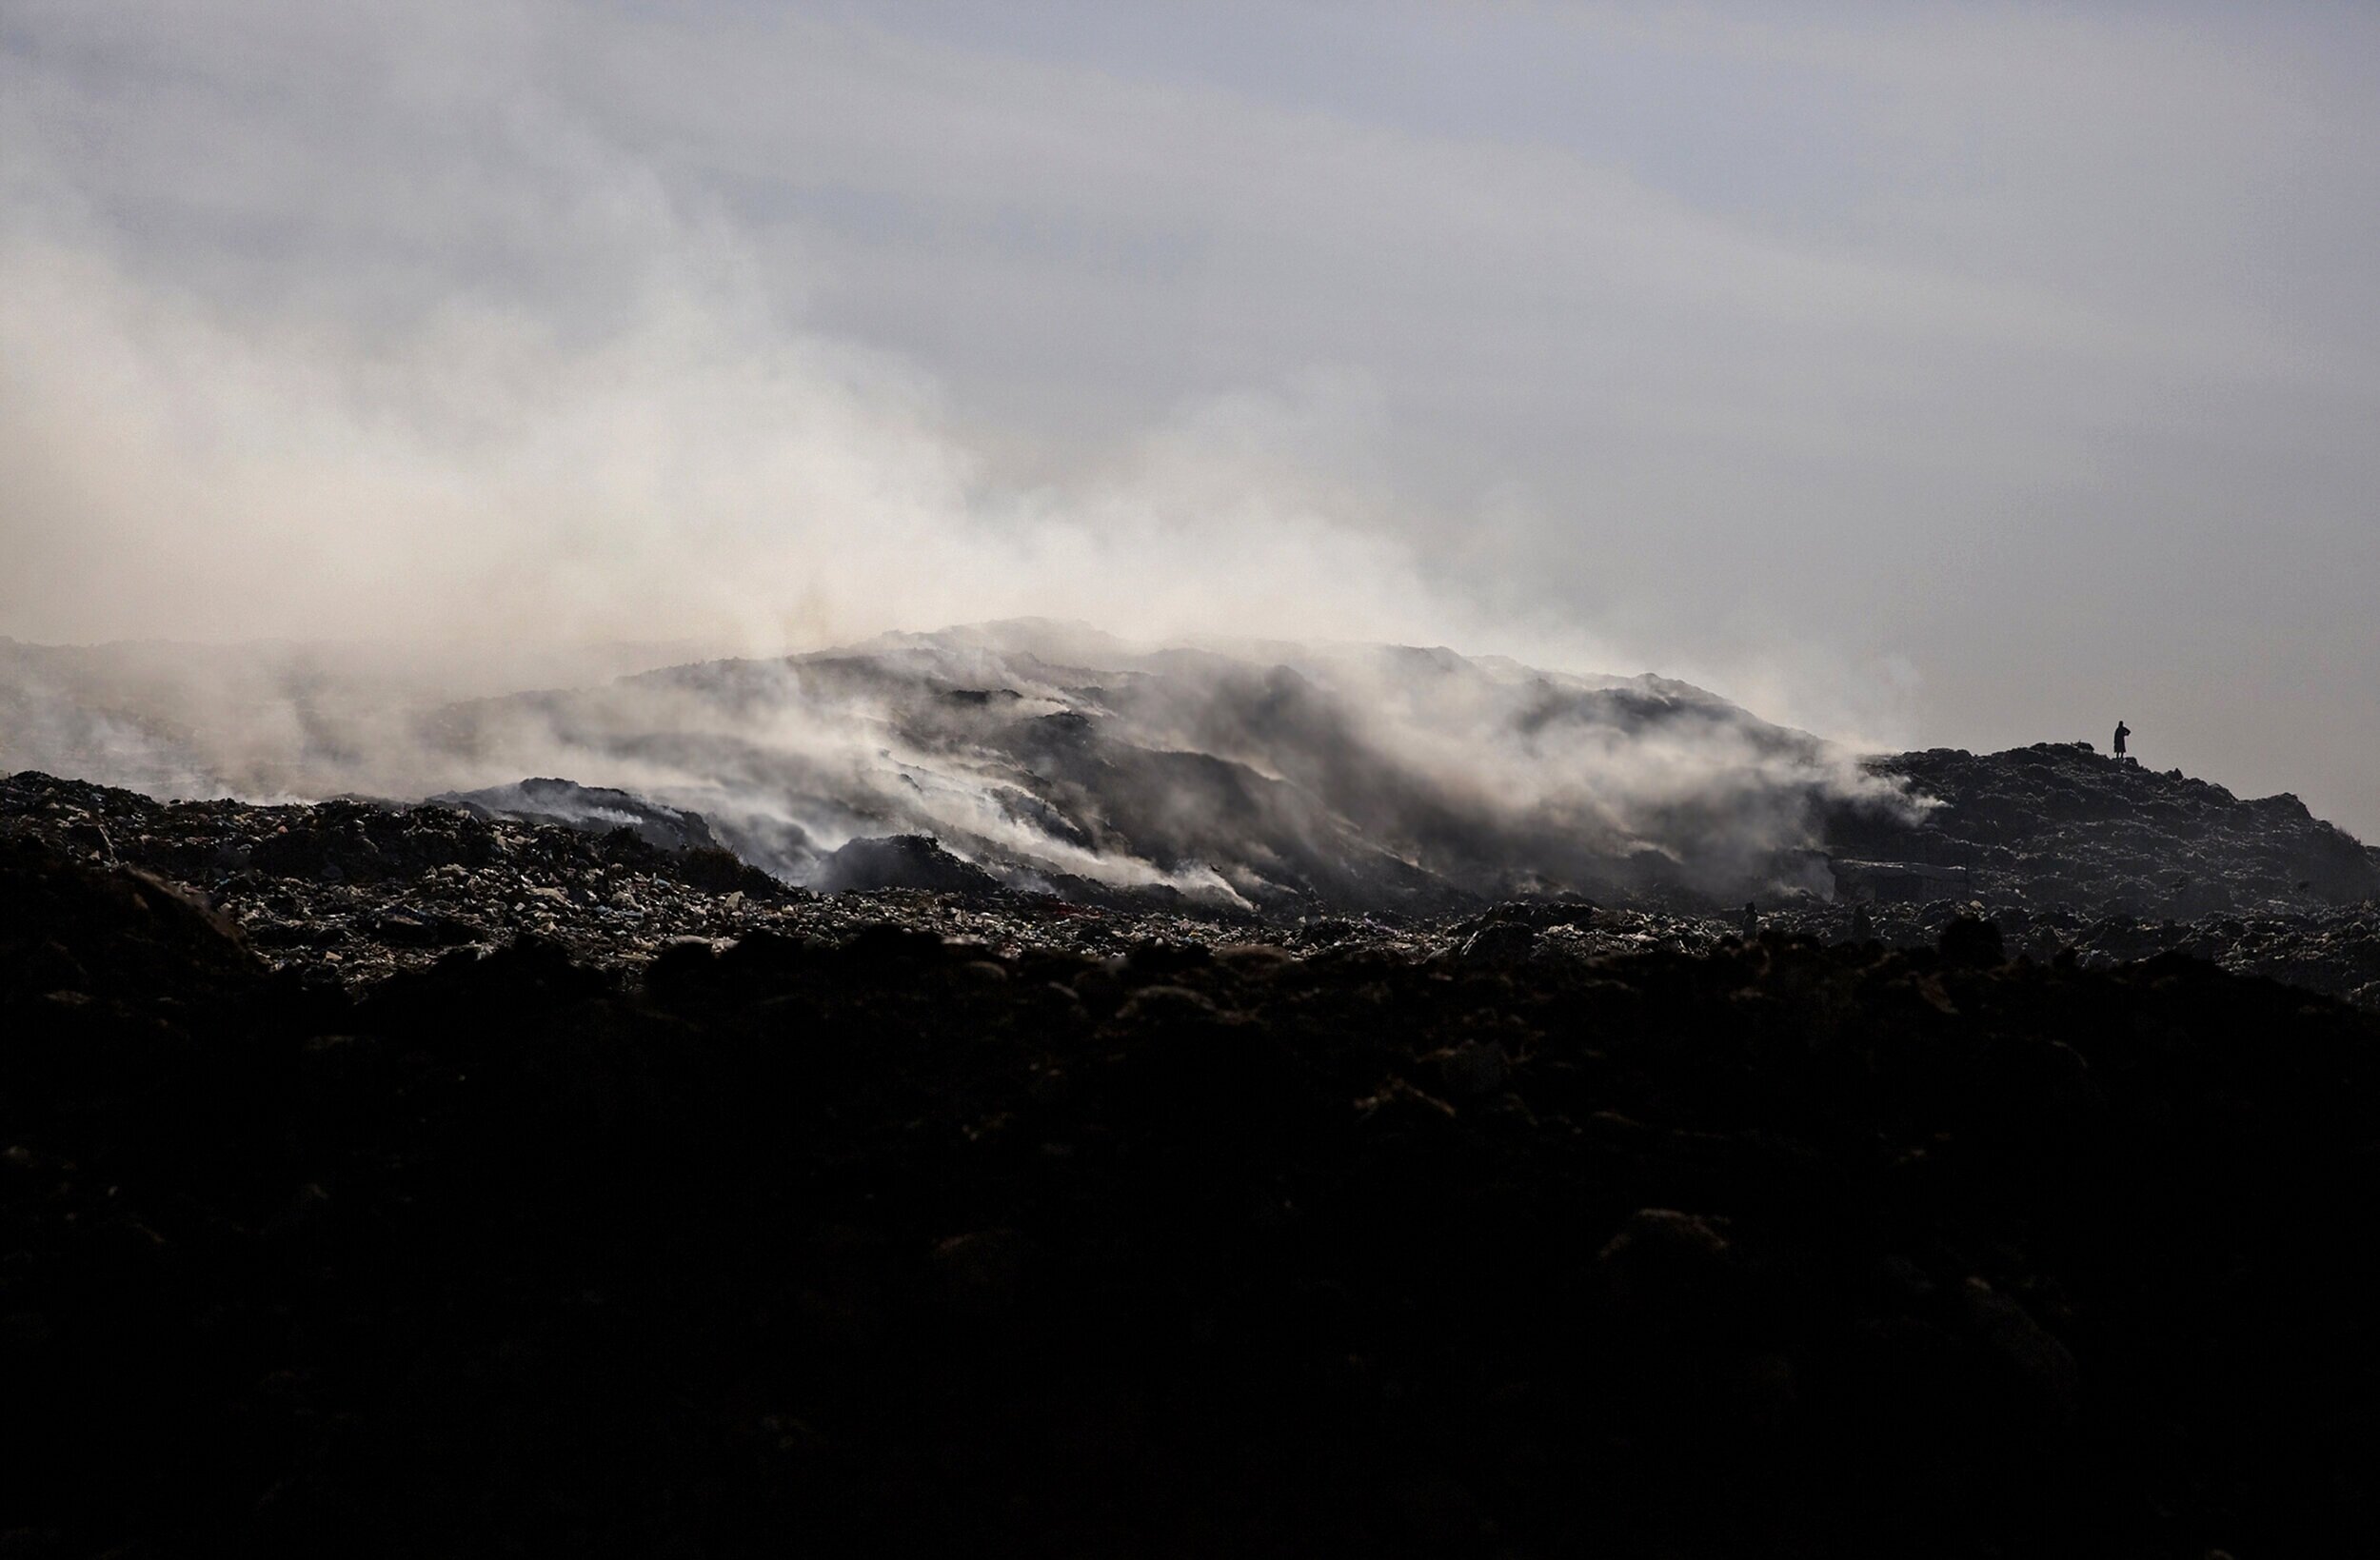  Constant plumes of smoke as seen in the Koshe landfill. In sites like this that don’t cover their waste, decomposing biological materials creates an abundance of heat which leads to spontaneous combustion.   The smoldering fires and resulting smoke 